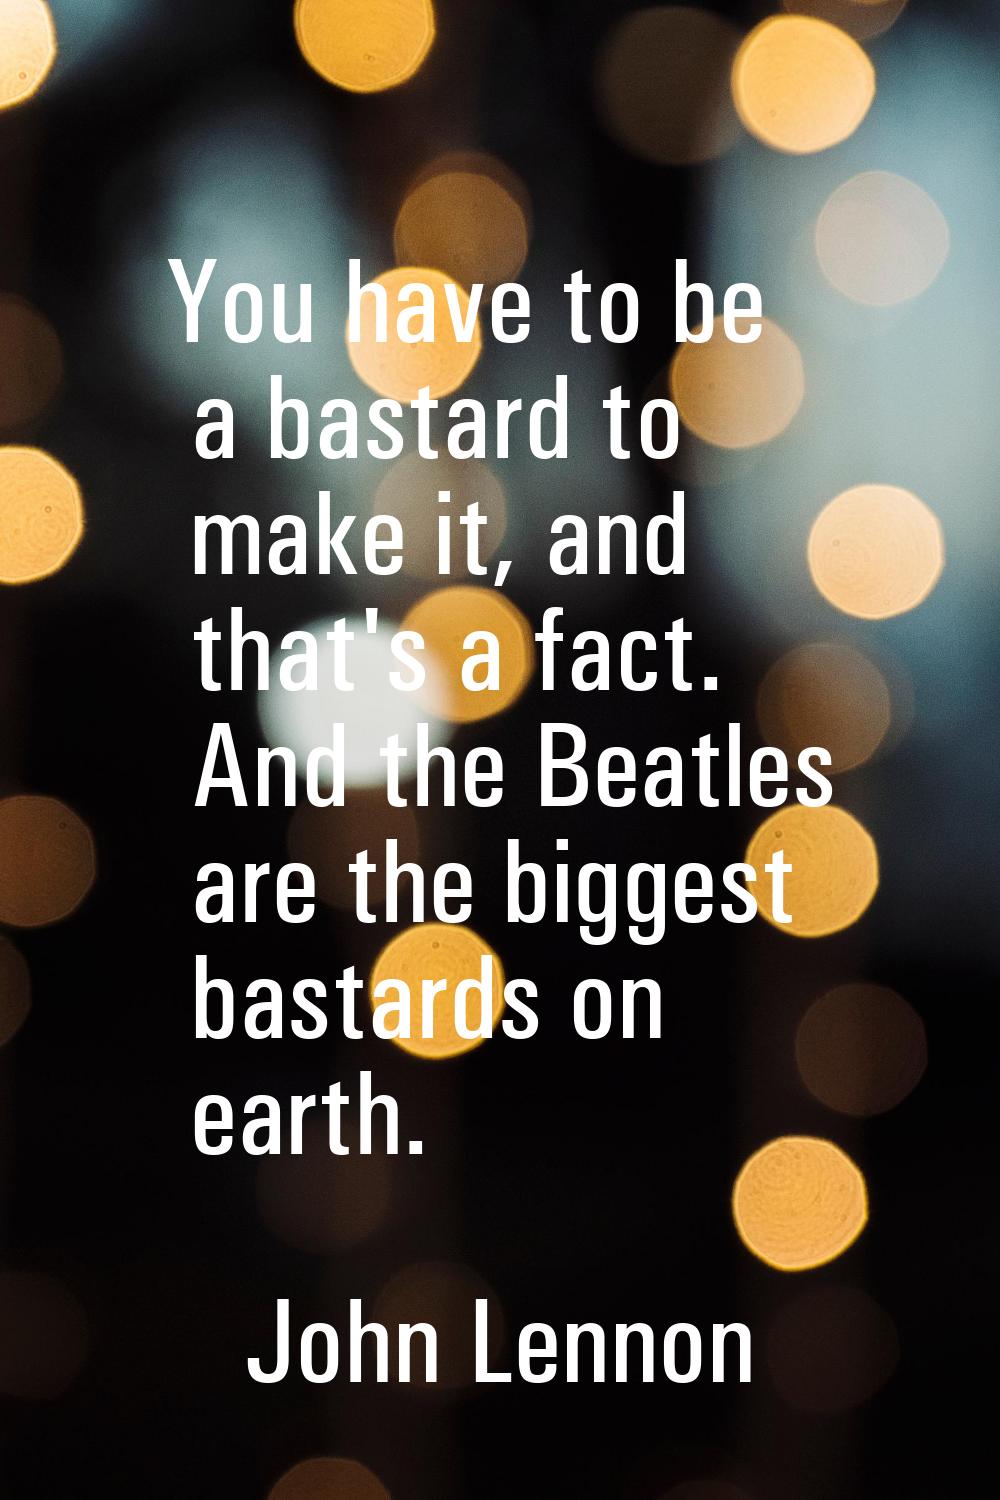 You have to be a bastard to make it, and that's a fact. And the Beatles are the biggest bastards on